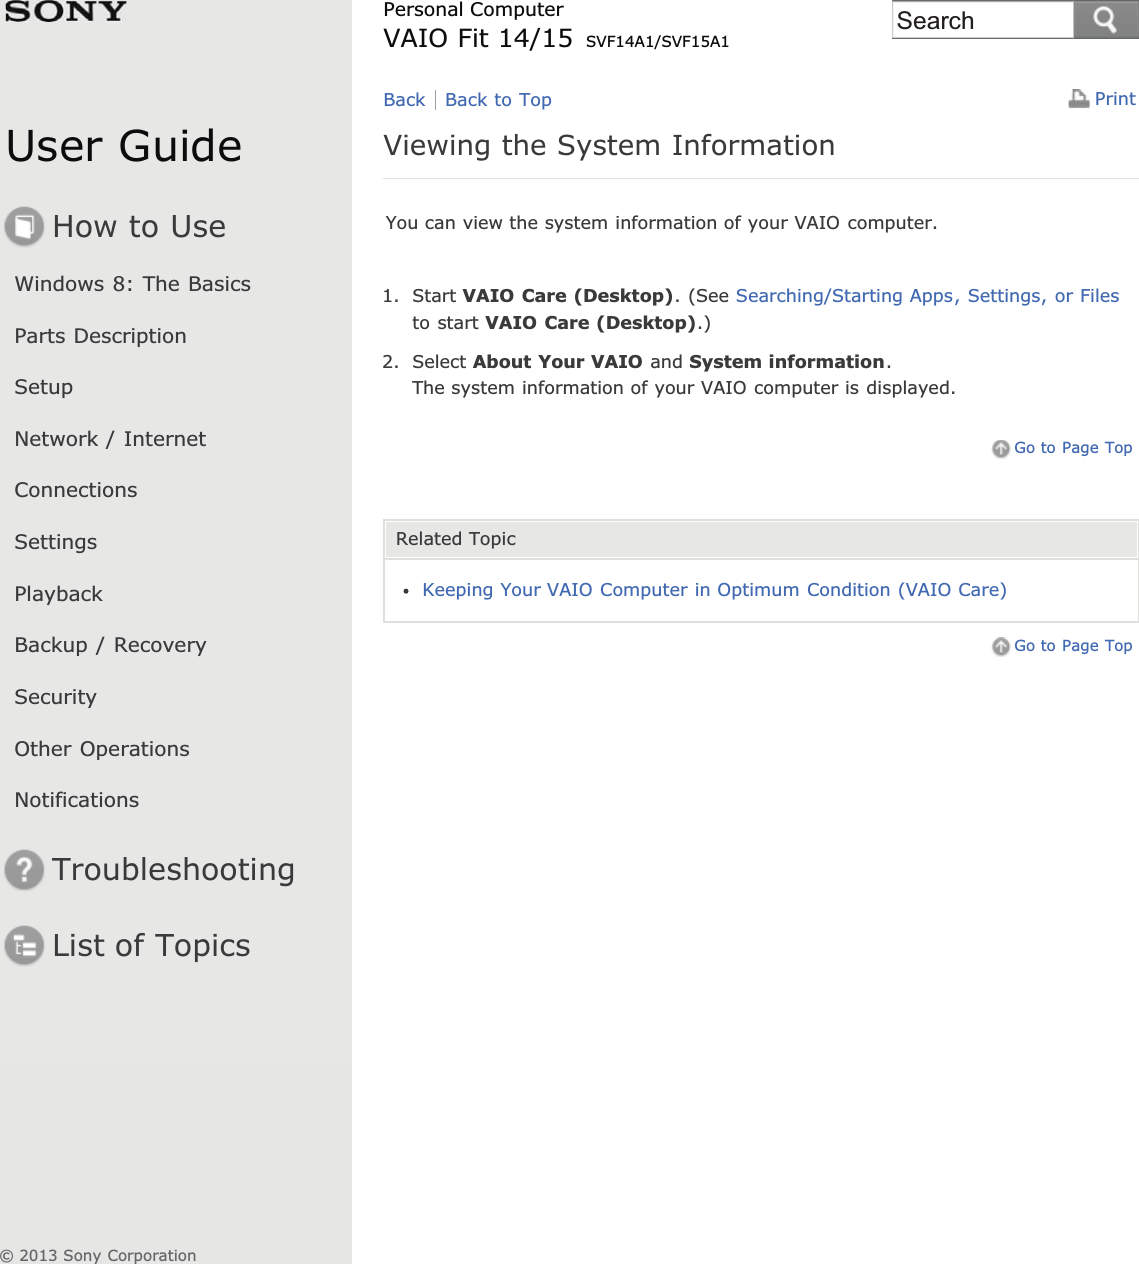 User GuideHow to UseWindows 8: The BasicsParts DescriptionSetupNetwork / InternetConnectionsSettingsPlaybackBackup / RecoverySecurityOther OperationsNotificationsTroubleshootingList of TopicsPrintPersonal ComputerVAIO Fit 14/15 SVF14A1/SVF15A1Viewing the System InformationYou can view the system information of your VAIO computer.1. Start VAIO Care (Desktop). (See Searching/Starting Apps, Settings, or Filesto start VAIO Care (Desktop).)2. Select About Your VAIO and System information.The system information of your VAIO computer is displayed.Go to Page TopRelated TopicKeeping Your VAIO Computer in Optimum Condition (VAIO Care)Go to Page TopBack Back to Top© 2013 Sony CorporationSearch